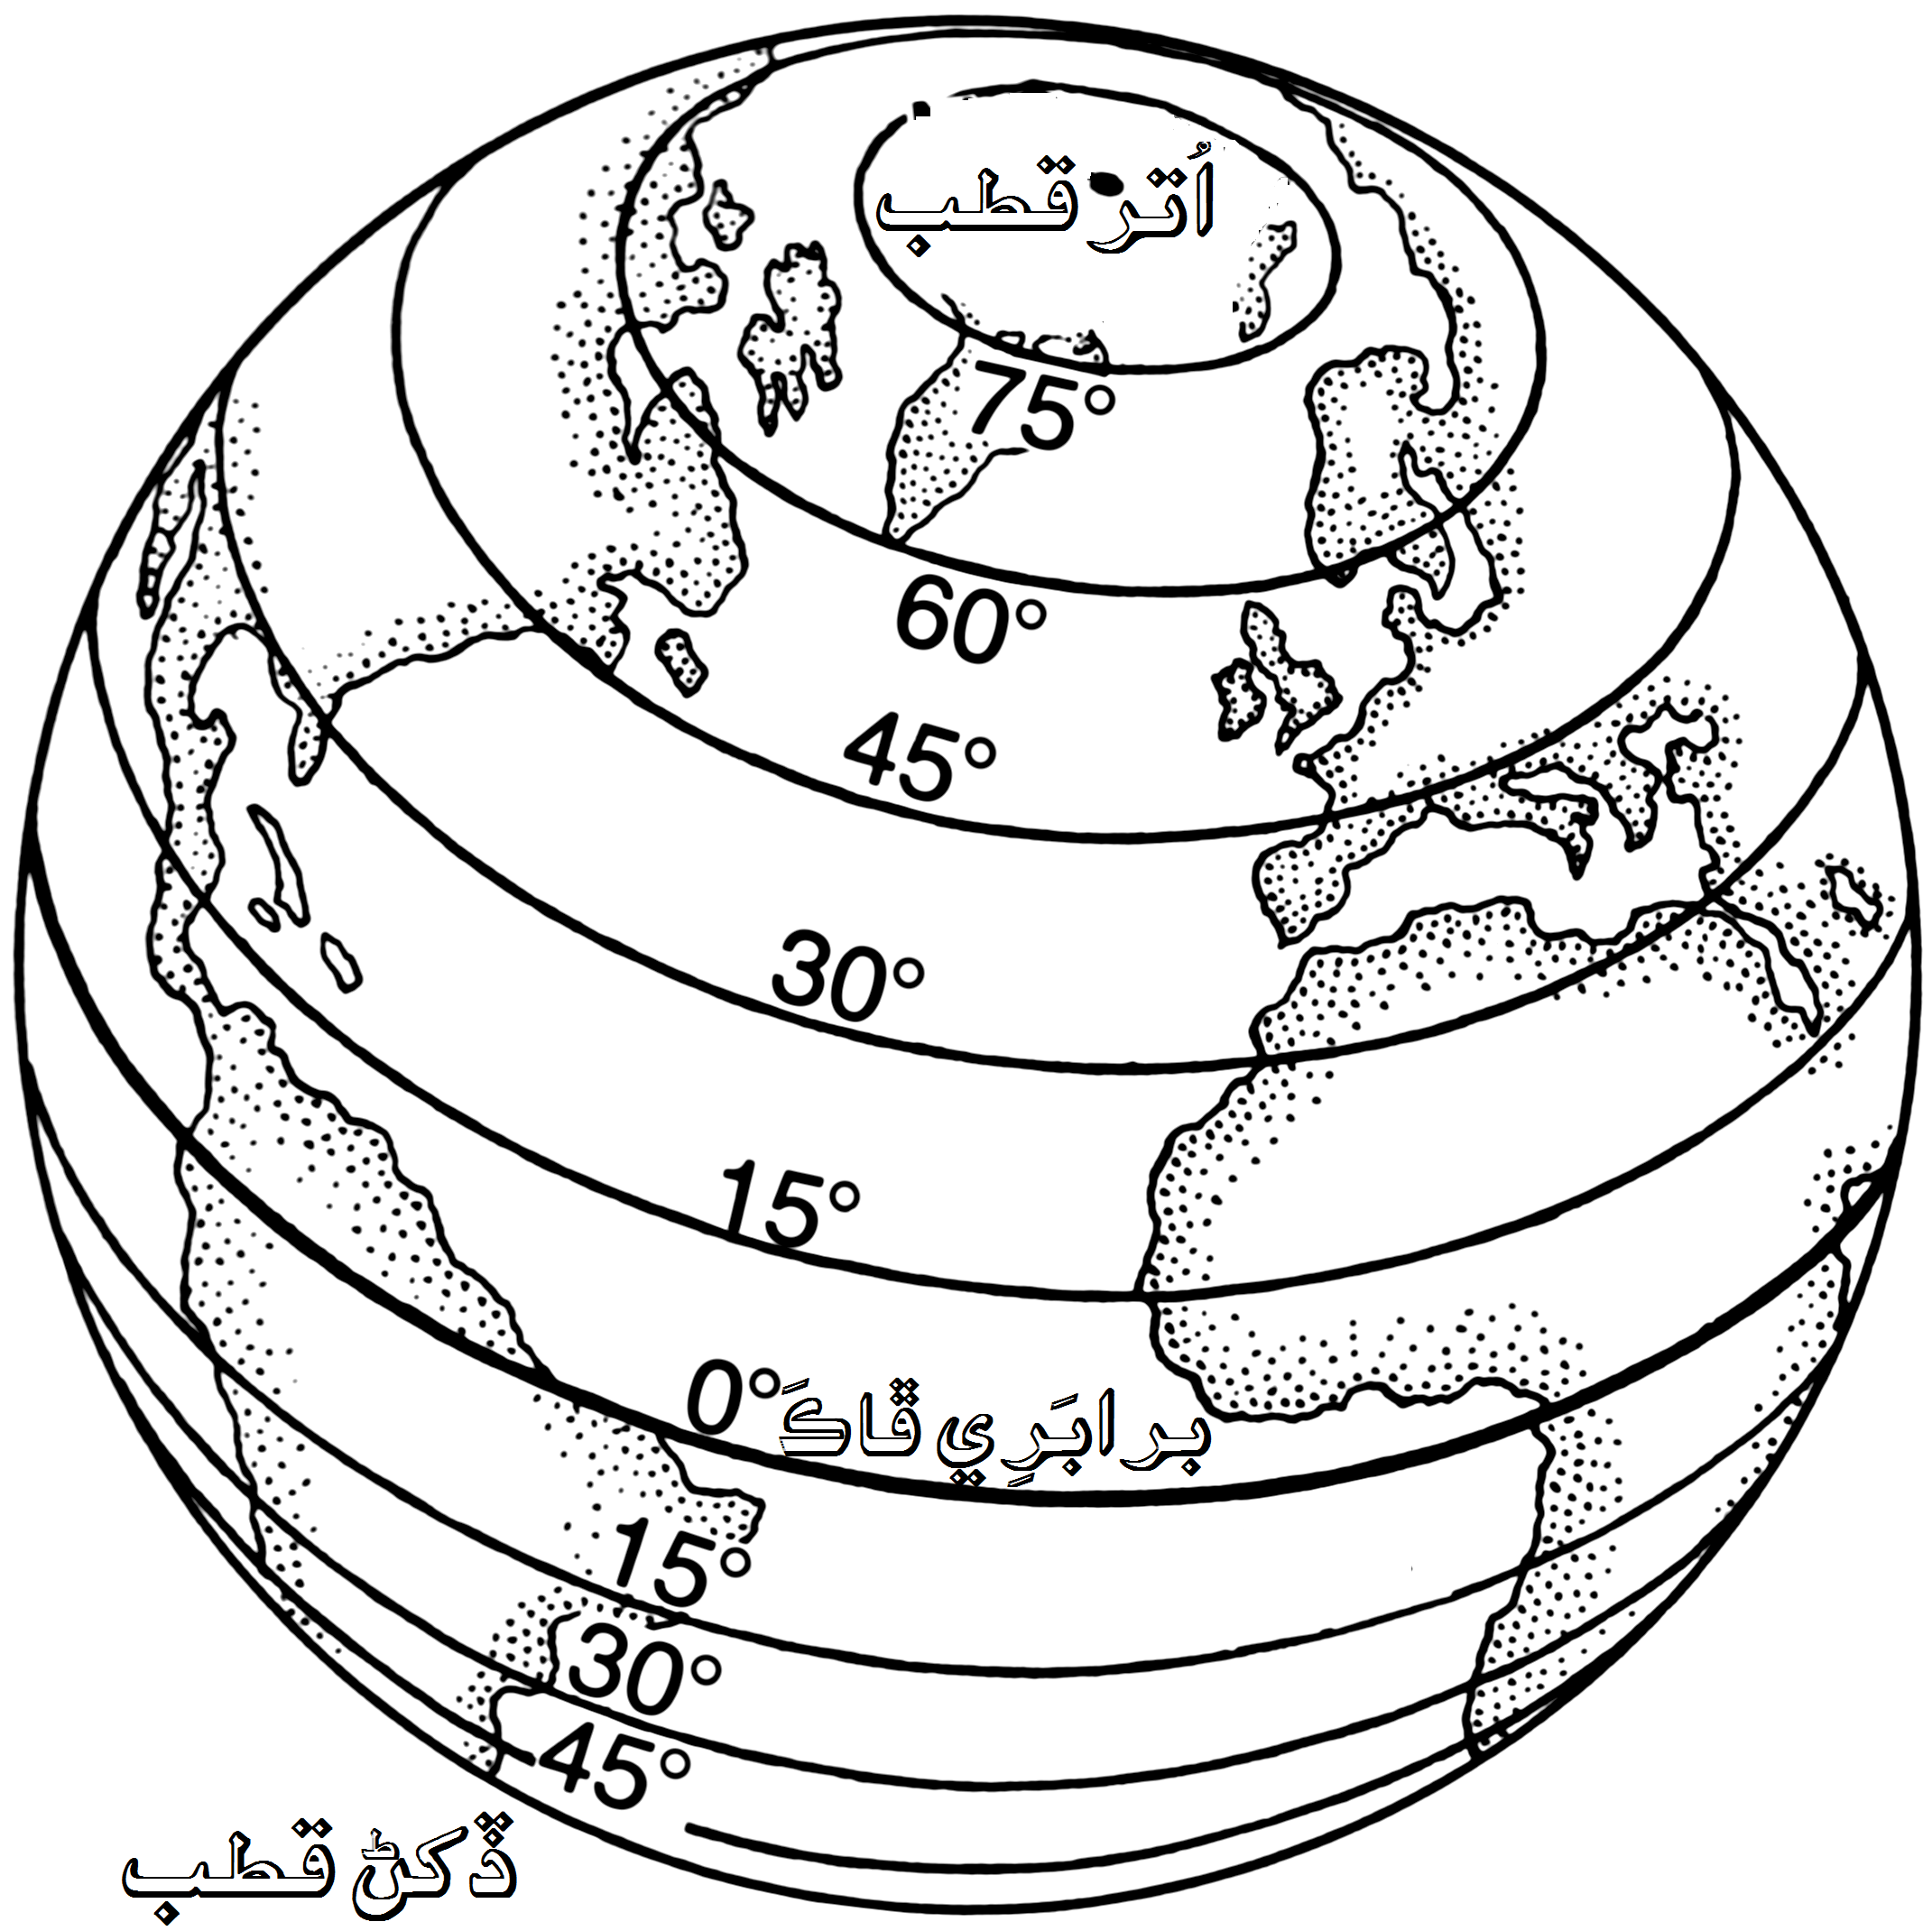 File:Lines of equal latitude 